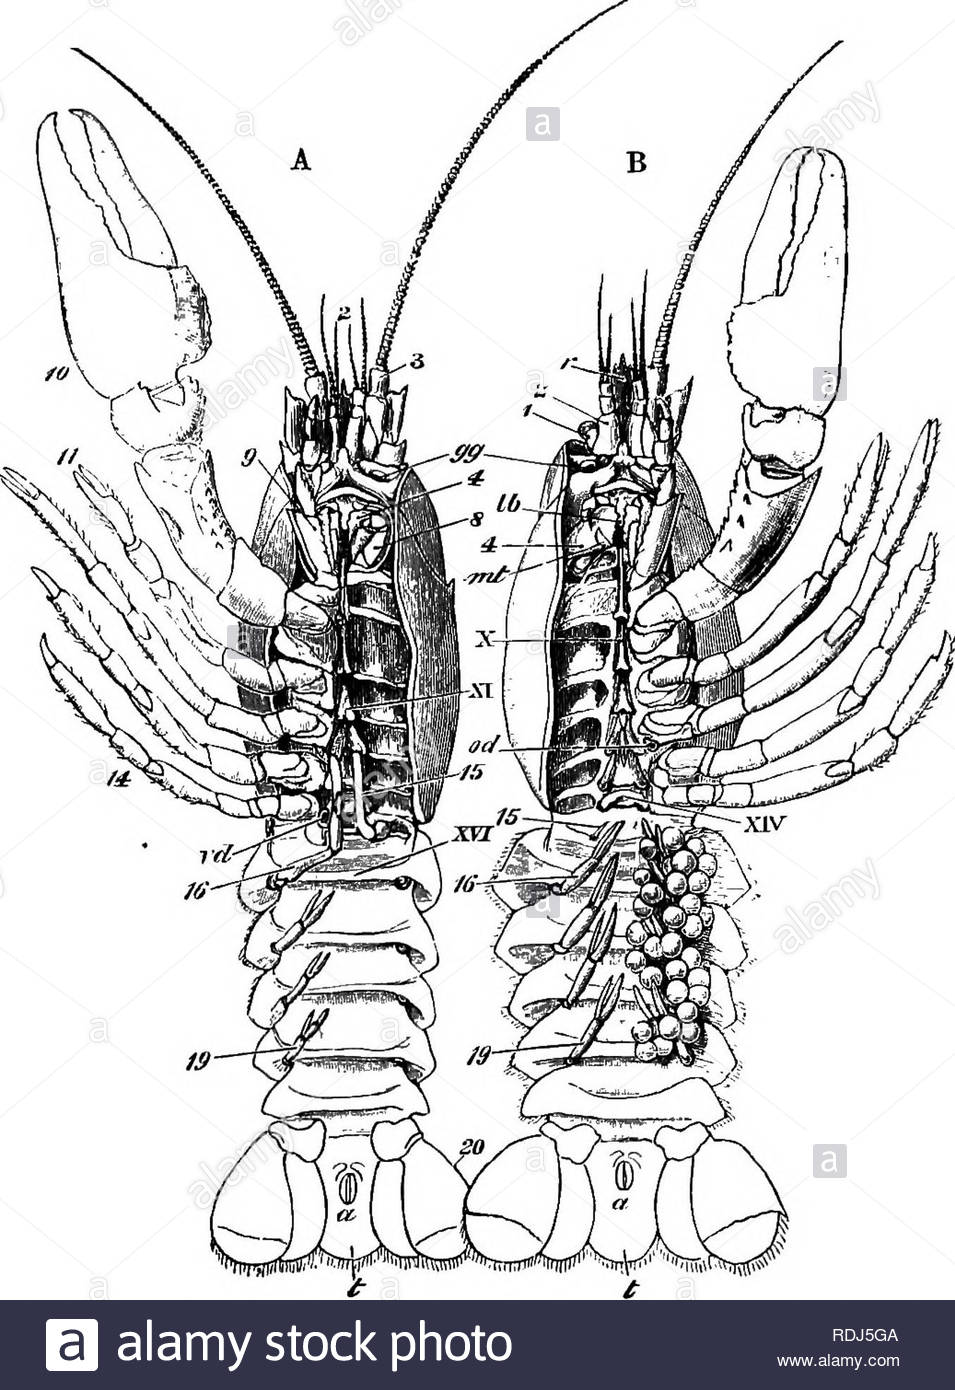 the crayfish an introduction to the study of zoology crayfish pia 3astacujluviatilisetiirbx or sternal views nat size a male b female a vent gg opening of the green gland lb labnim m metastoma or lower lip od opening of the oviduct vd that of the vas deferens 1 eye stalk s antennulc 3 antenna a mandible s second maxillipede 9 thii d or external maxiuipede 10 forceps 11 first leg u fourth leg 15 16 19 so first second fifth and sixth abdominal appendages x xt xiv sterna of the fourth fifth and eighth thoracic somite xvi RDJ5GA